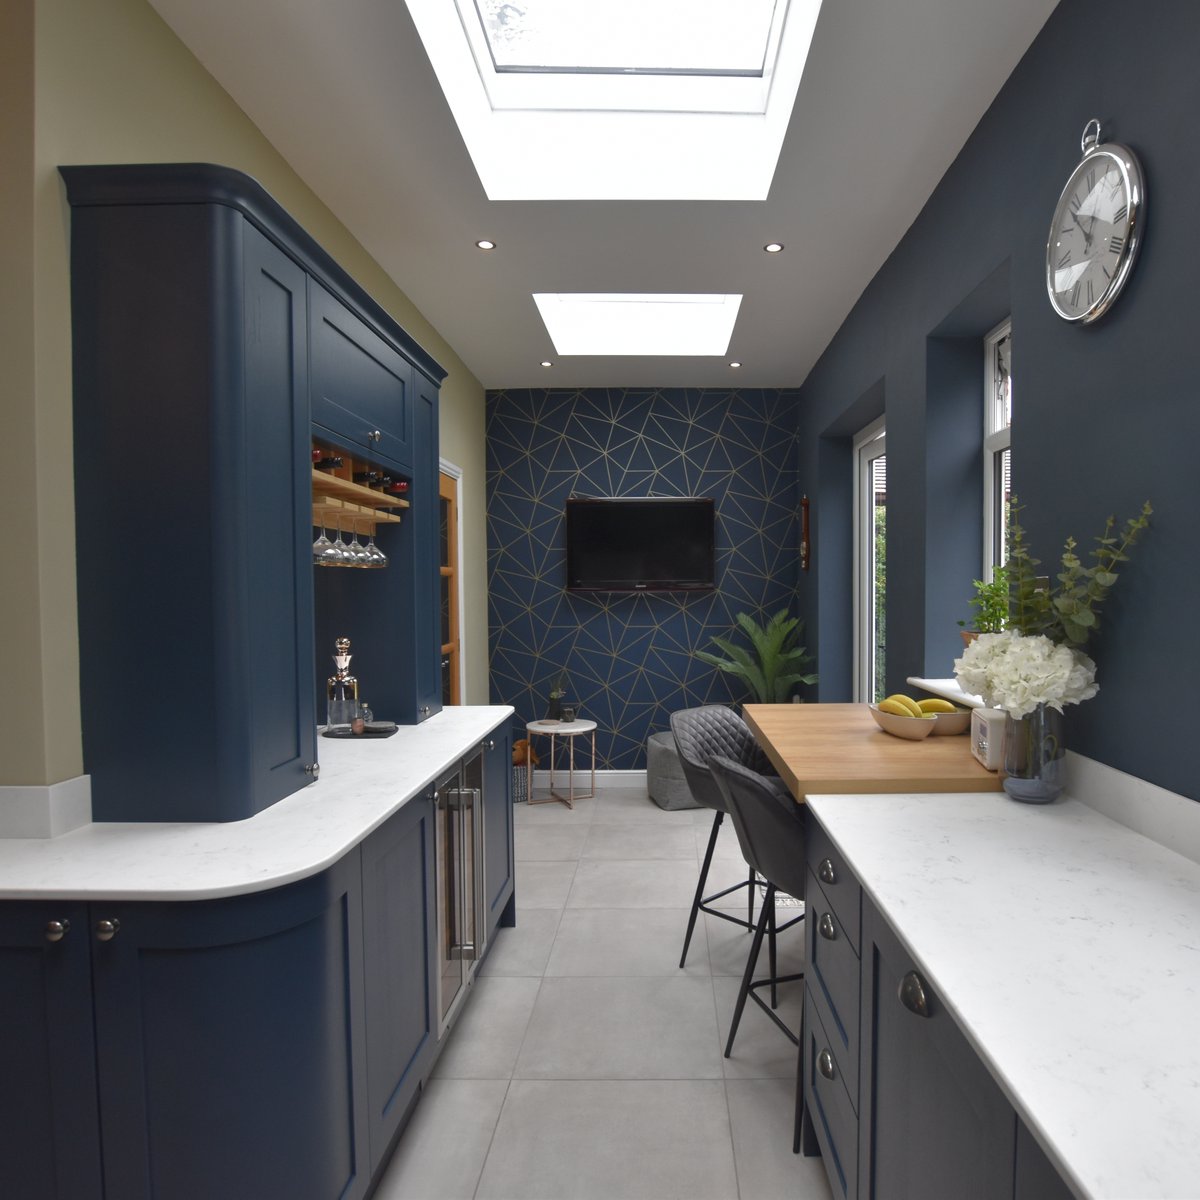 Live life like a King with Masterclass Kitchens. This sumptuous Hardwick range in Oxford Blue radiates elegance, with the smooth edging and deep, dark colouring. A space die for.⁠ .⁠ 📸 @studio62kitchens⁠ .⁠ #masterclasskitchens #masterclassmoments #interiordesign #design